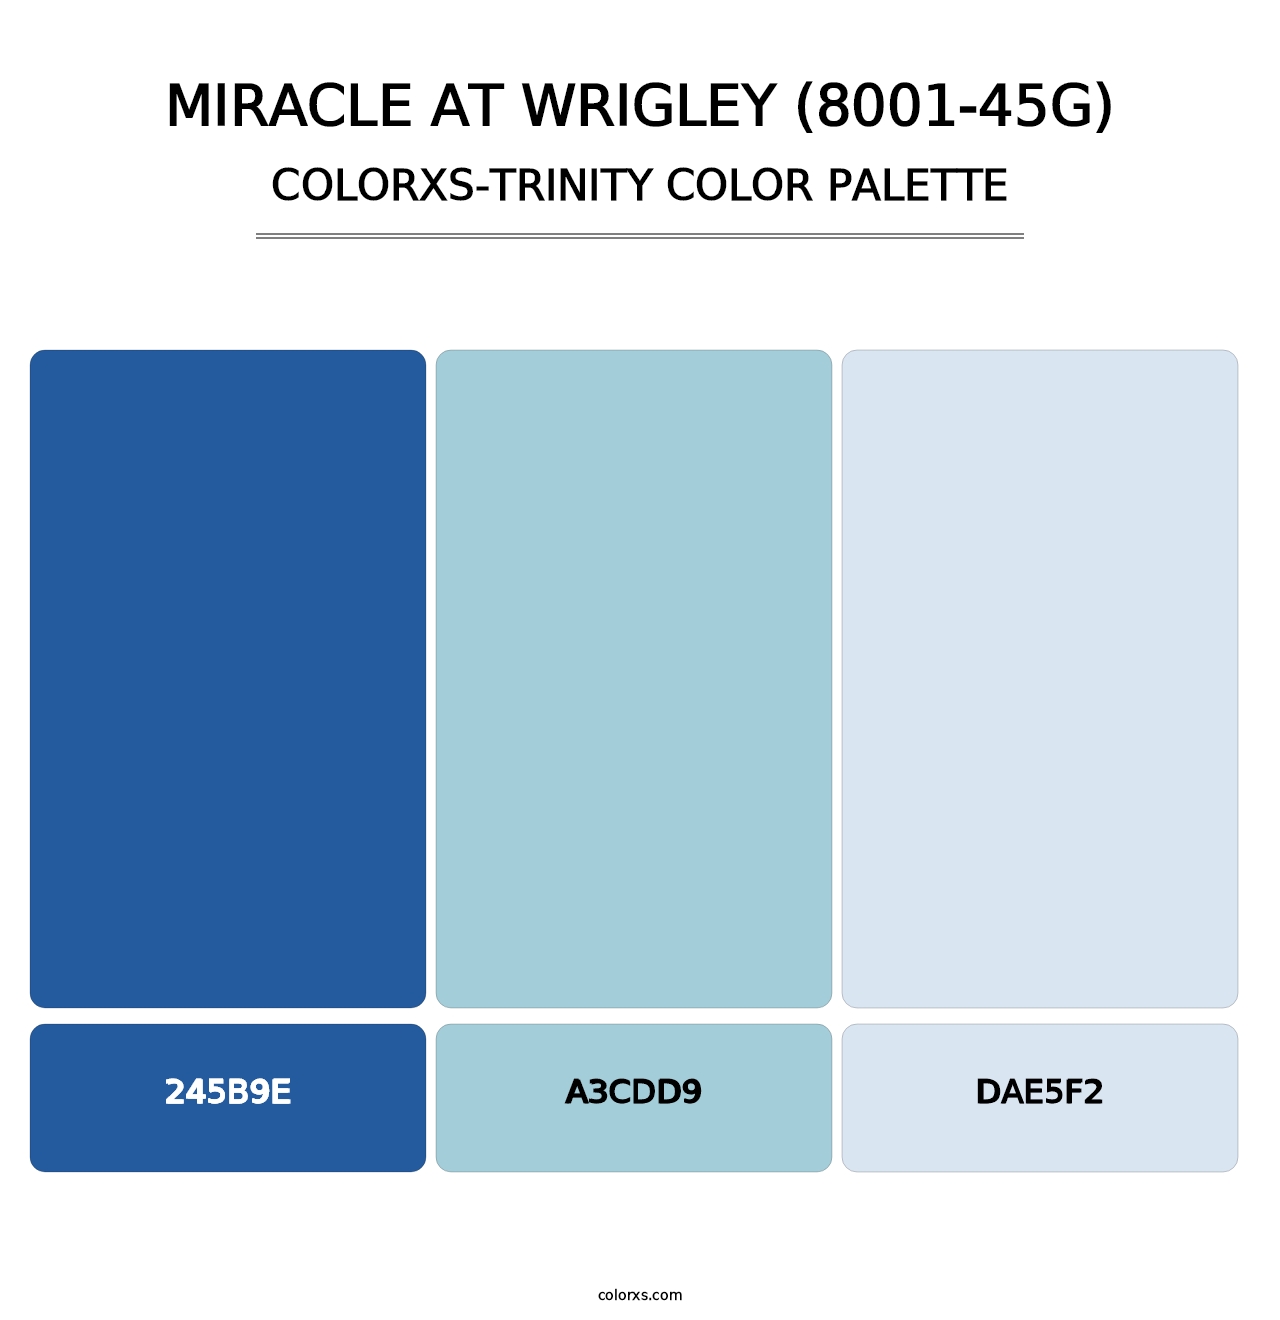 Miracle at Wrigley (8001-45G) - Colorxs Trinity Palette